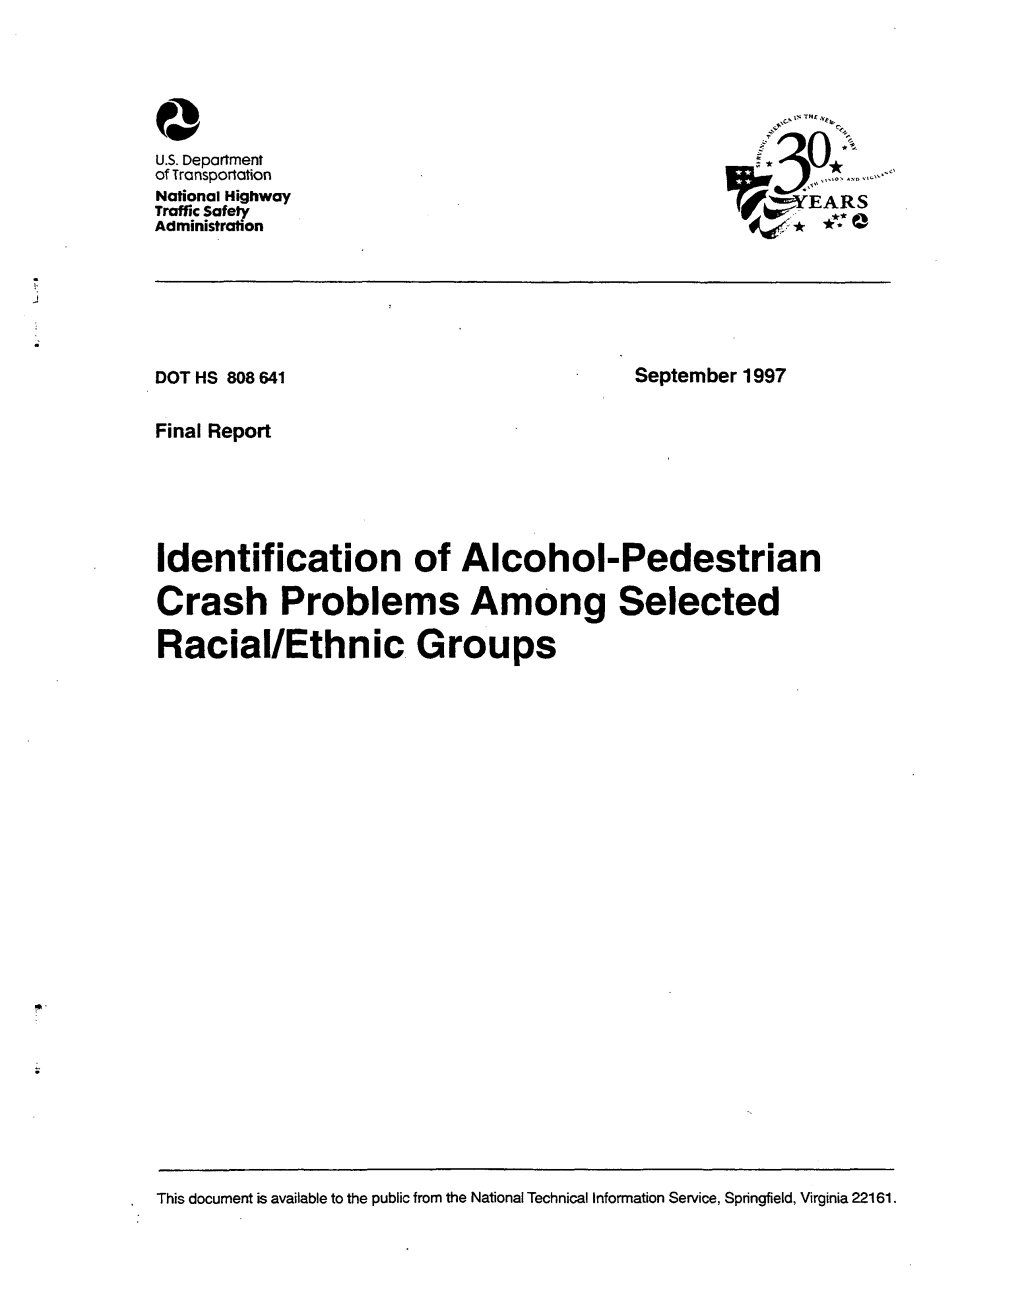 Identification of Alcohol-Pedestrian Crash Problems Among Selected Racial/Ethnic